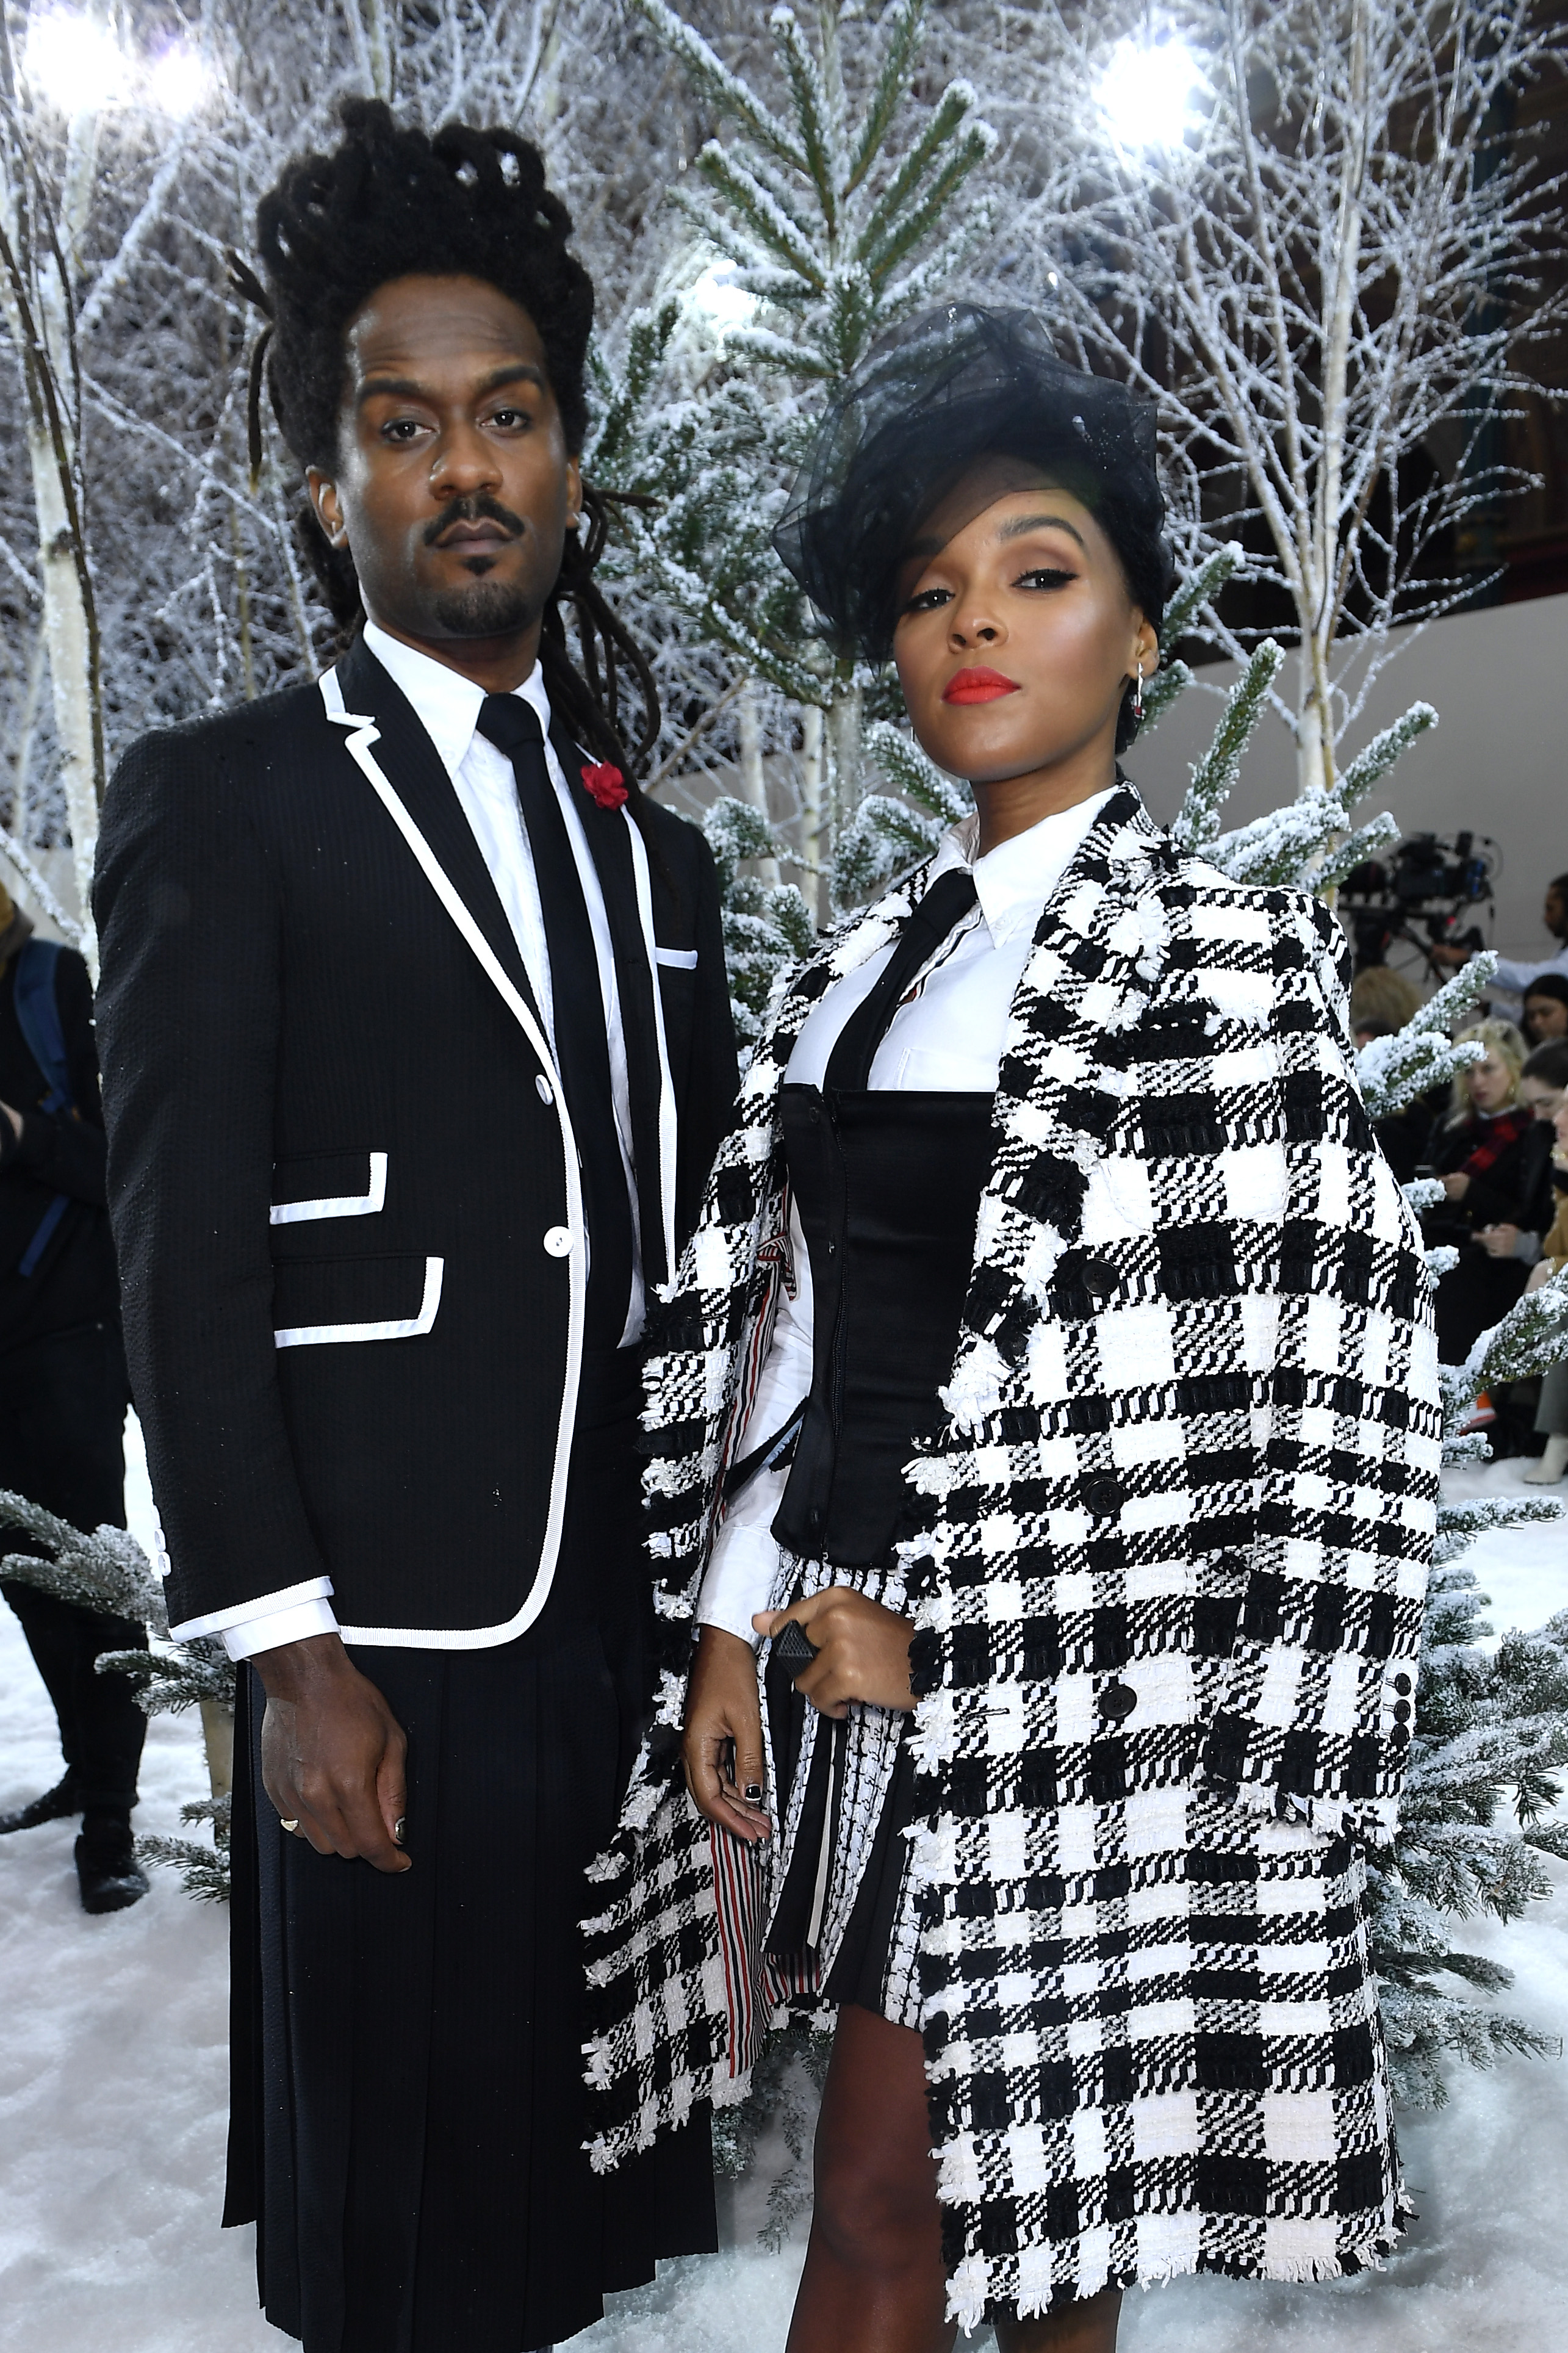 Nate Wonder and Janelle Monáe attend the Thom Browne show as part of the Paris Fashion Week Womenswear Fall/Winter 2020/2021 on March 1, 2020, in Paris, France. | Source: Getty Images